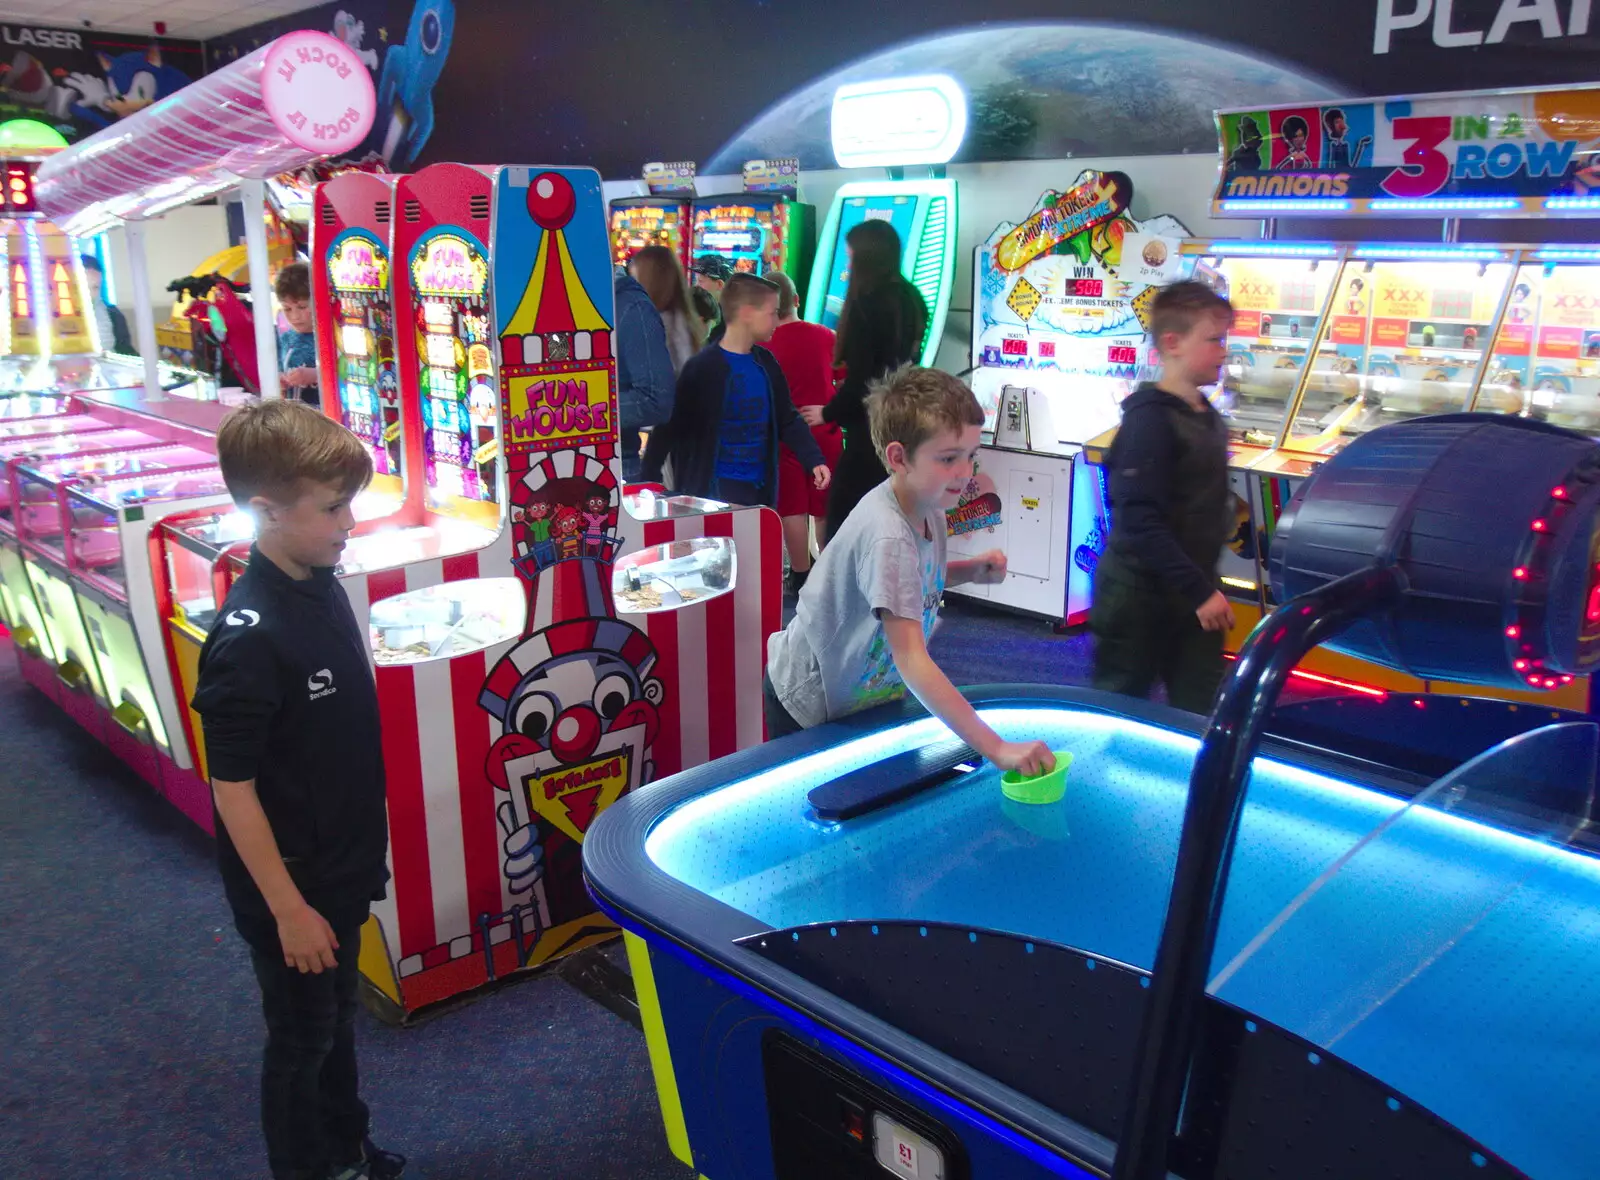 Henry watches Fred play Air Hockey, from A Mini Qualcomm Reunion, The Wrestlers, Cambridge - 26th April 2019